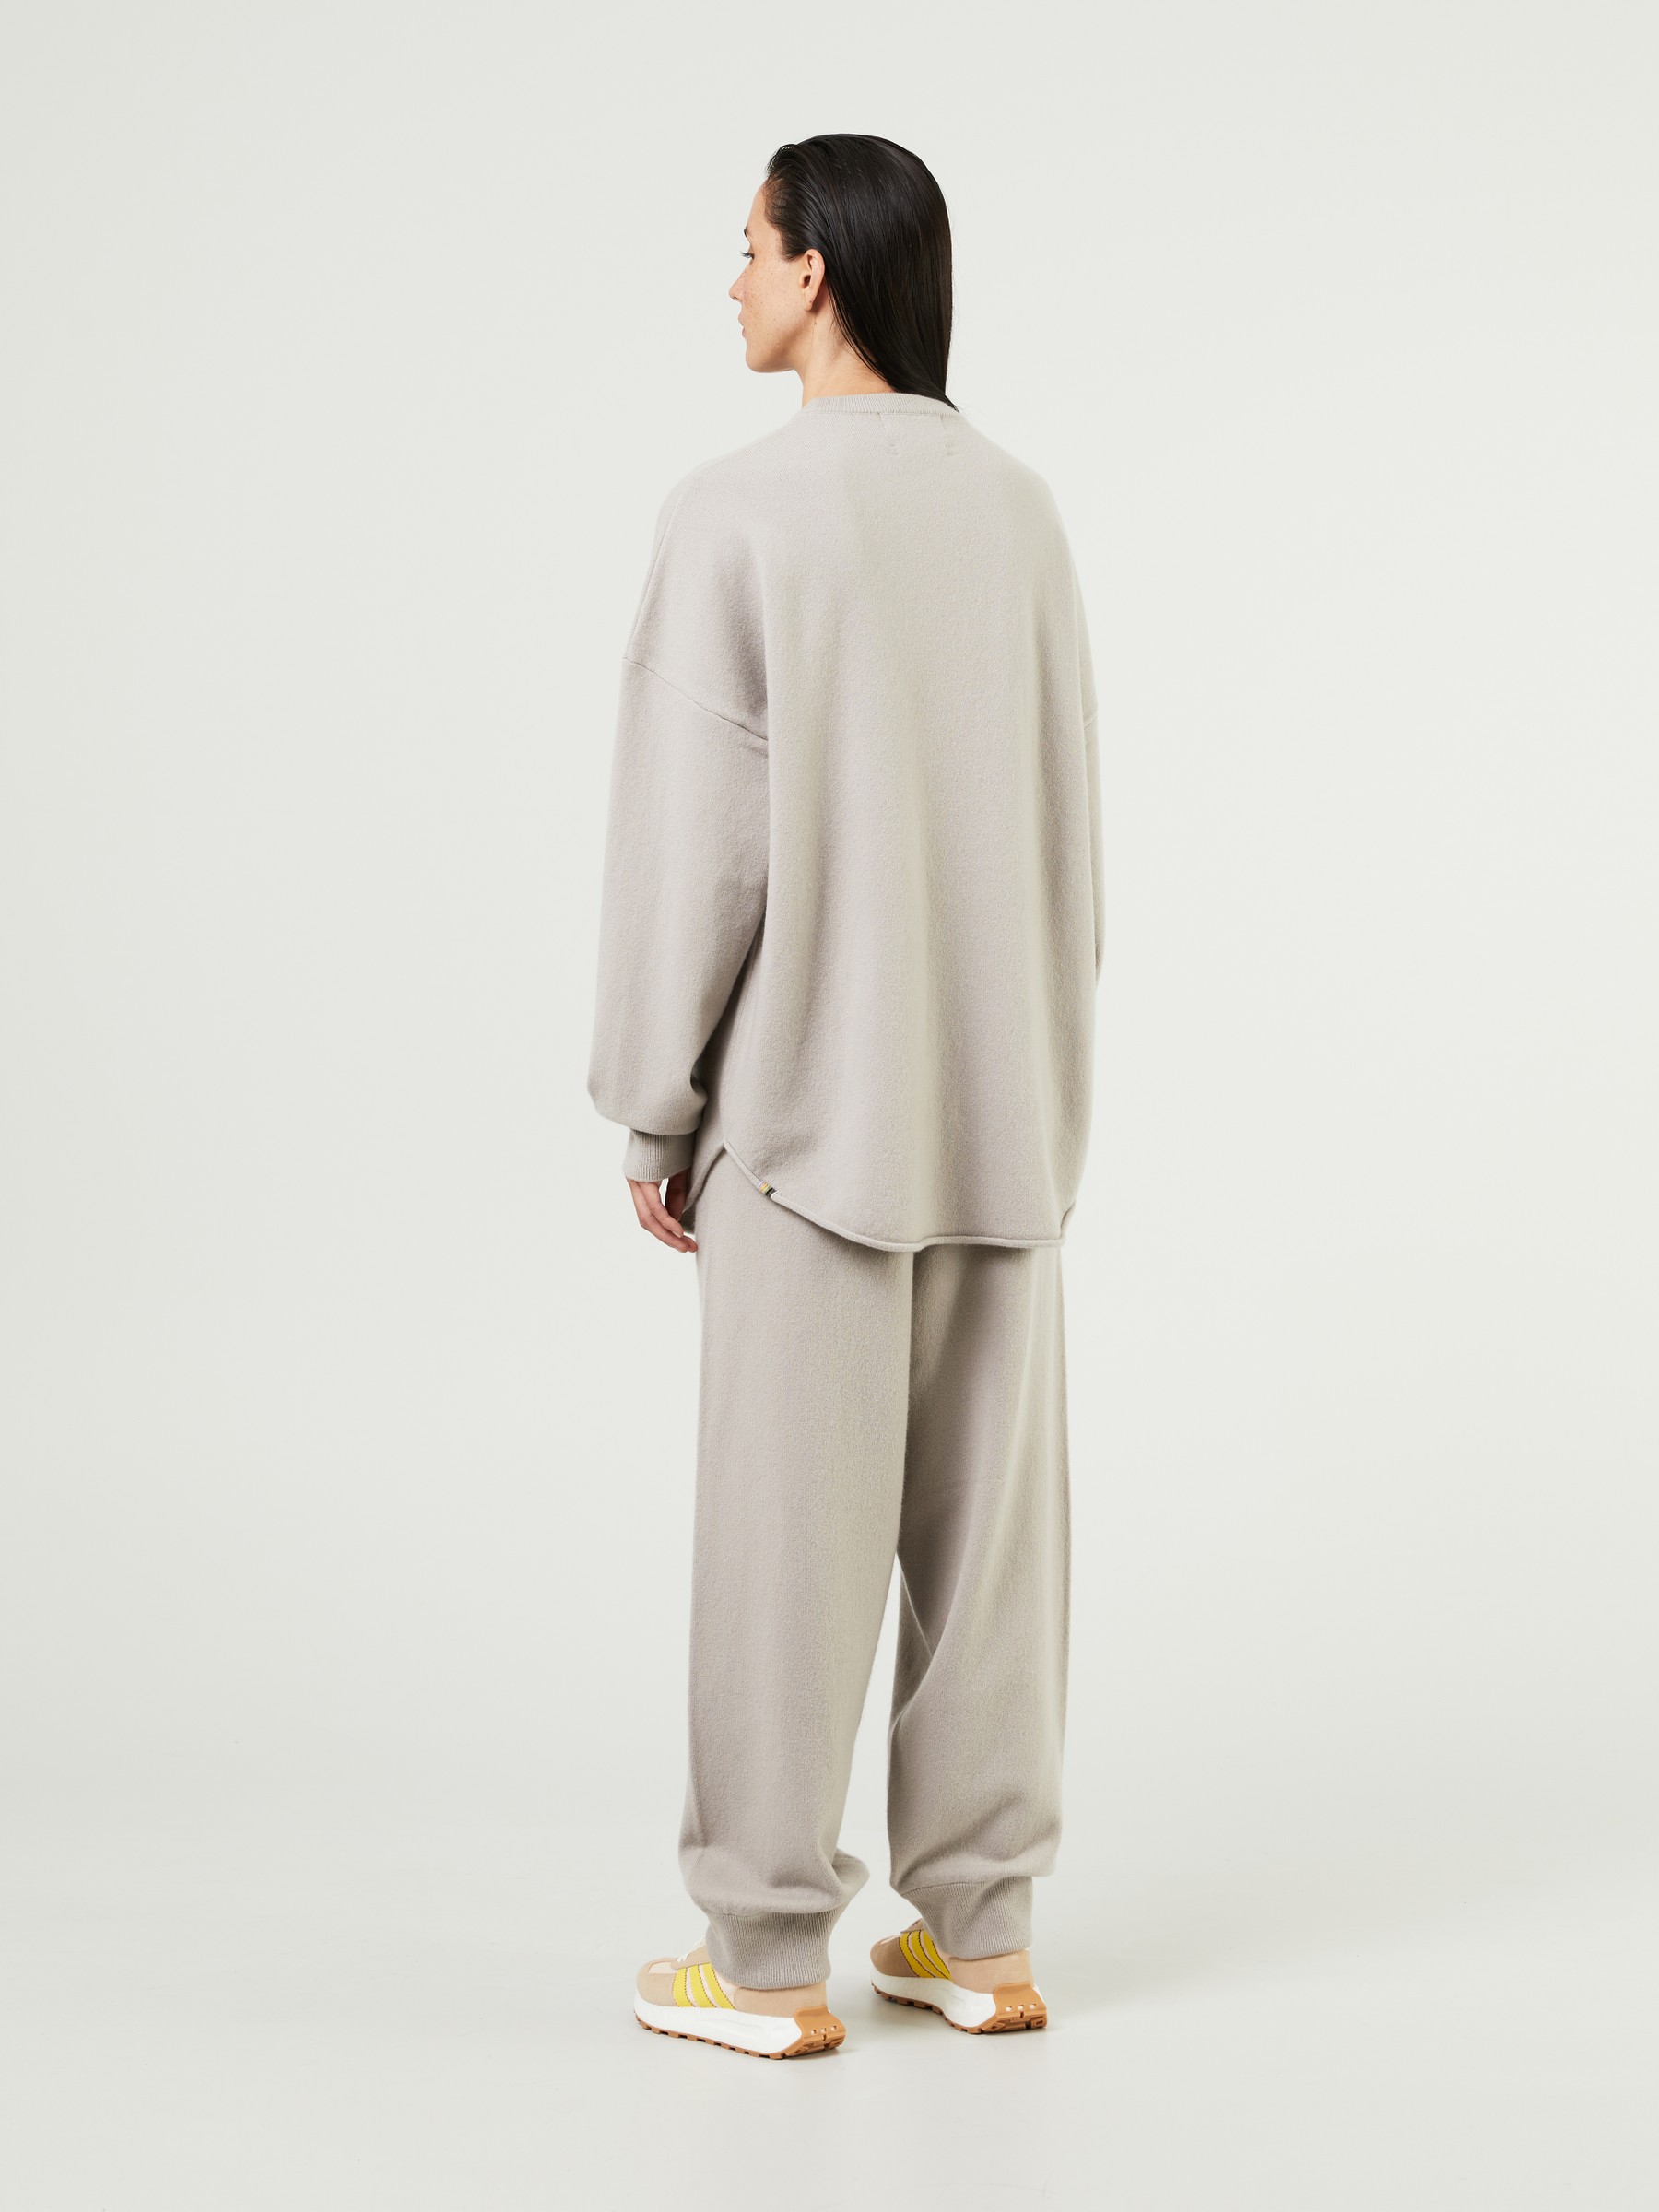 extreme cashmere x Cashmere Sweater 'n°53 Crew Hop' Light Grey 